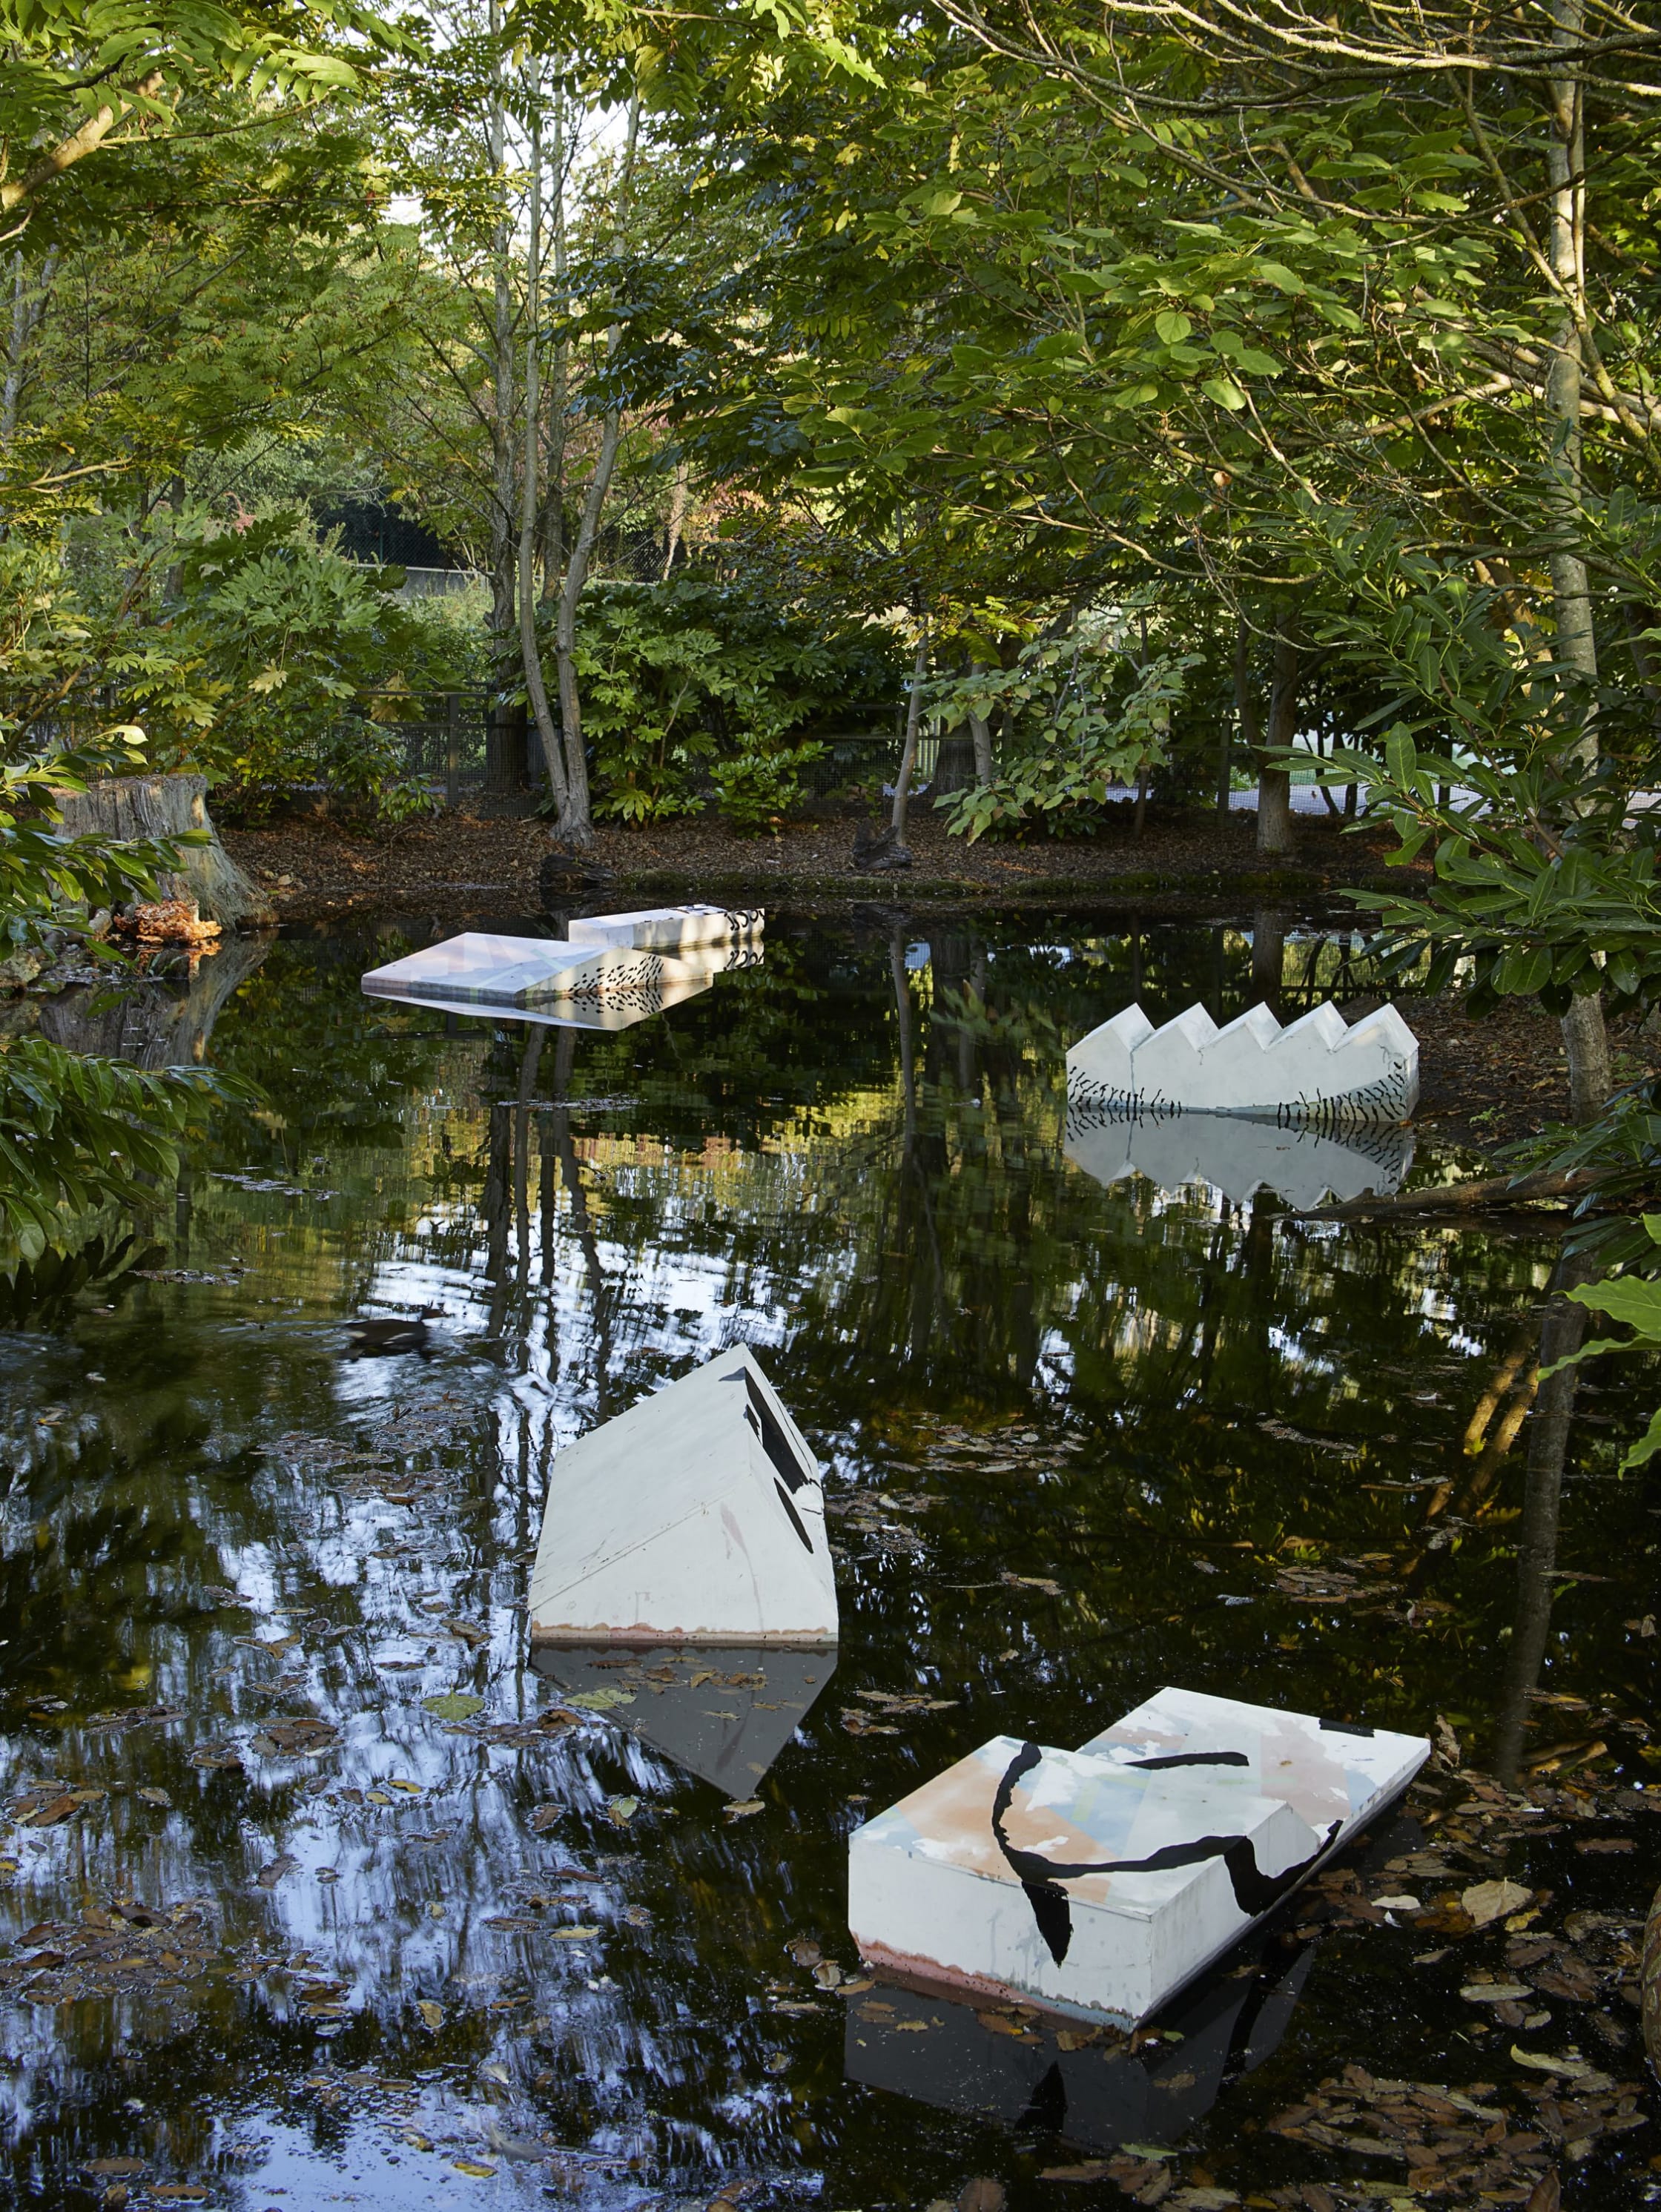 Photograph of an outdoor art installation. Green trees surround a small body of water, in which sit three sculptures. Each sculpture is white and resembles industrial aesthetics: stairs, for example.